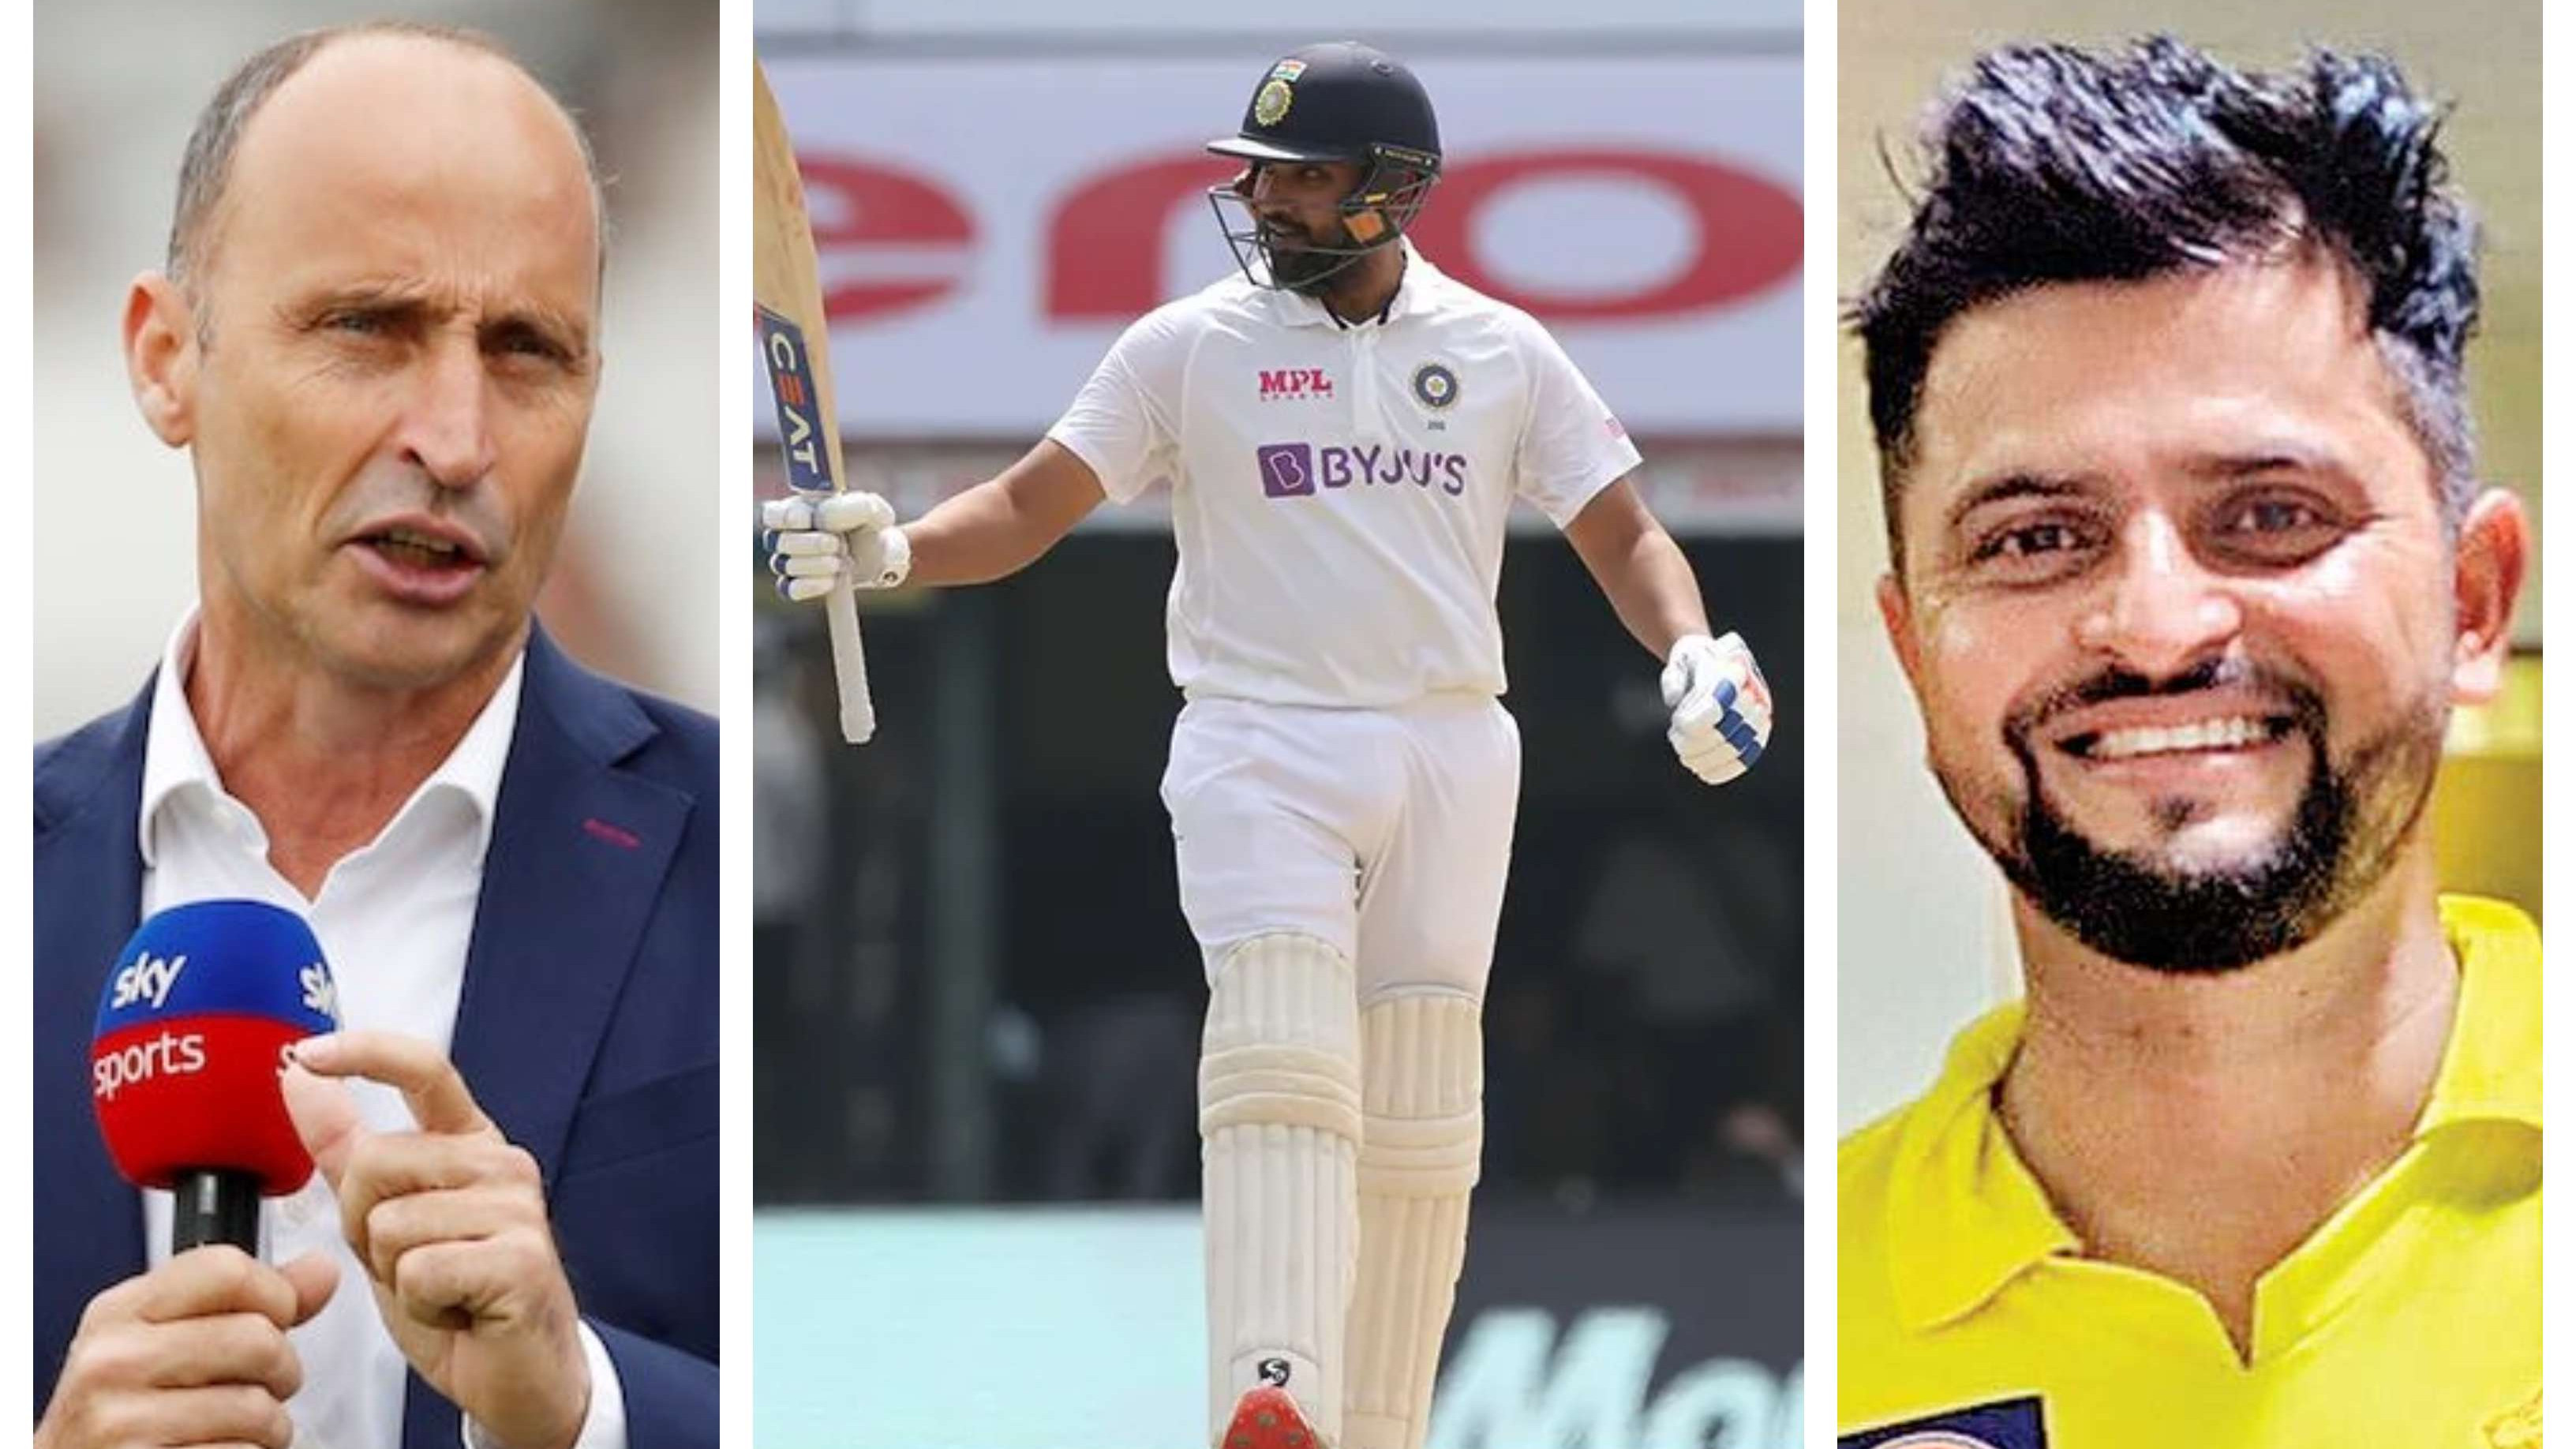 IND v ENG 2021: Cricket fraternity lauds Rohit Sharma as he slams his 7th Test ton on Day 1 at Chepauk